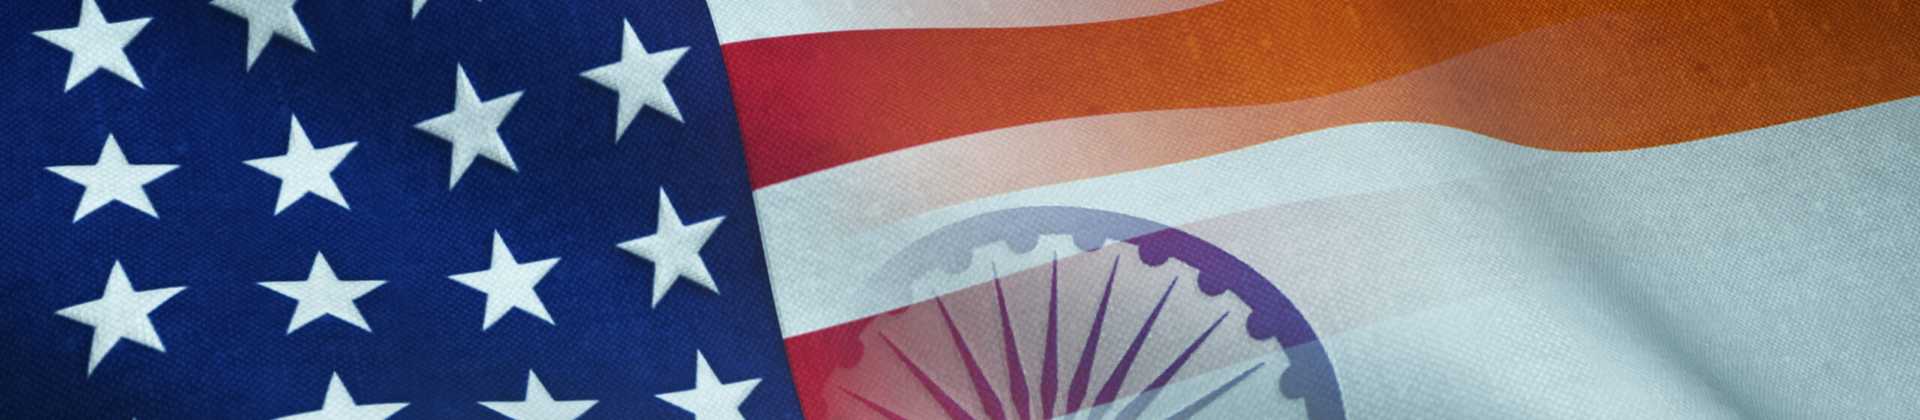 Indian Visa Applications Soar: US Embassy Announces Record Numbers and Future Streamlining